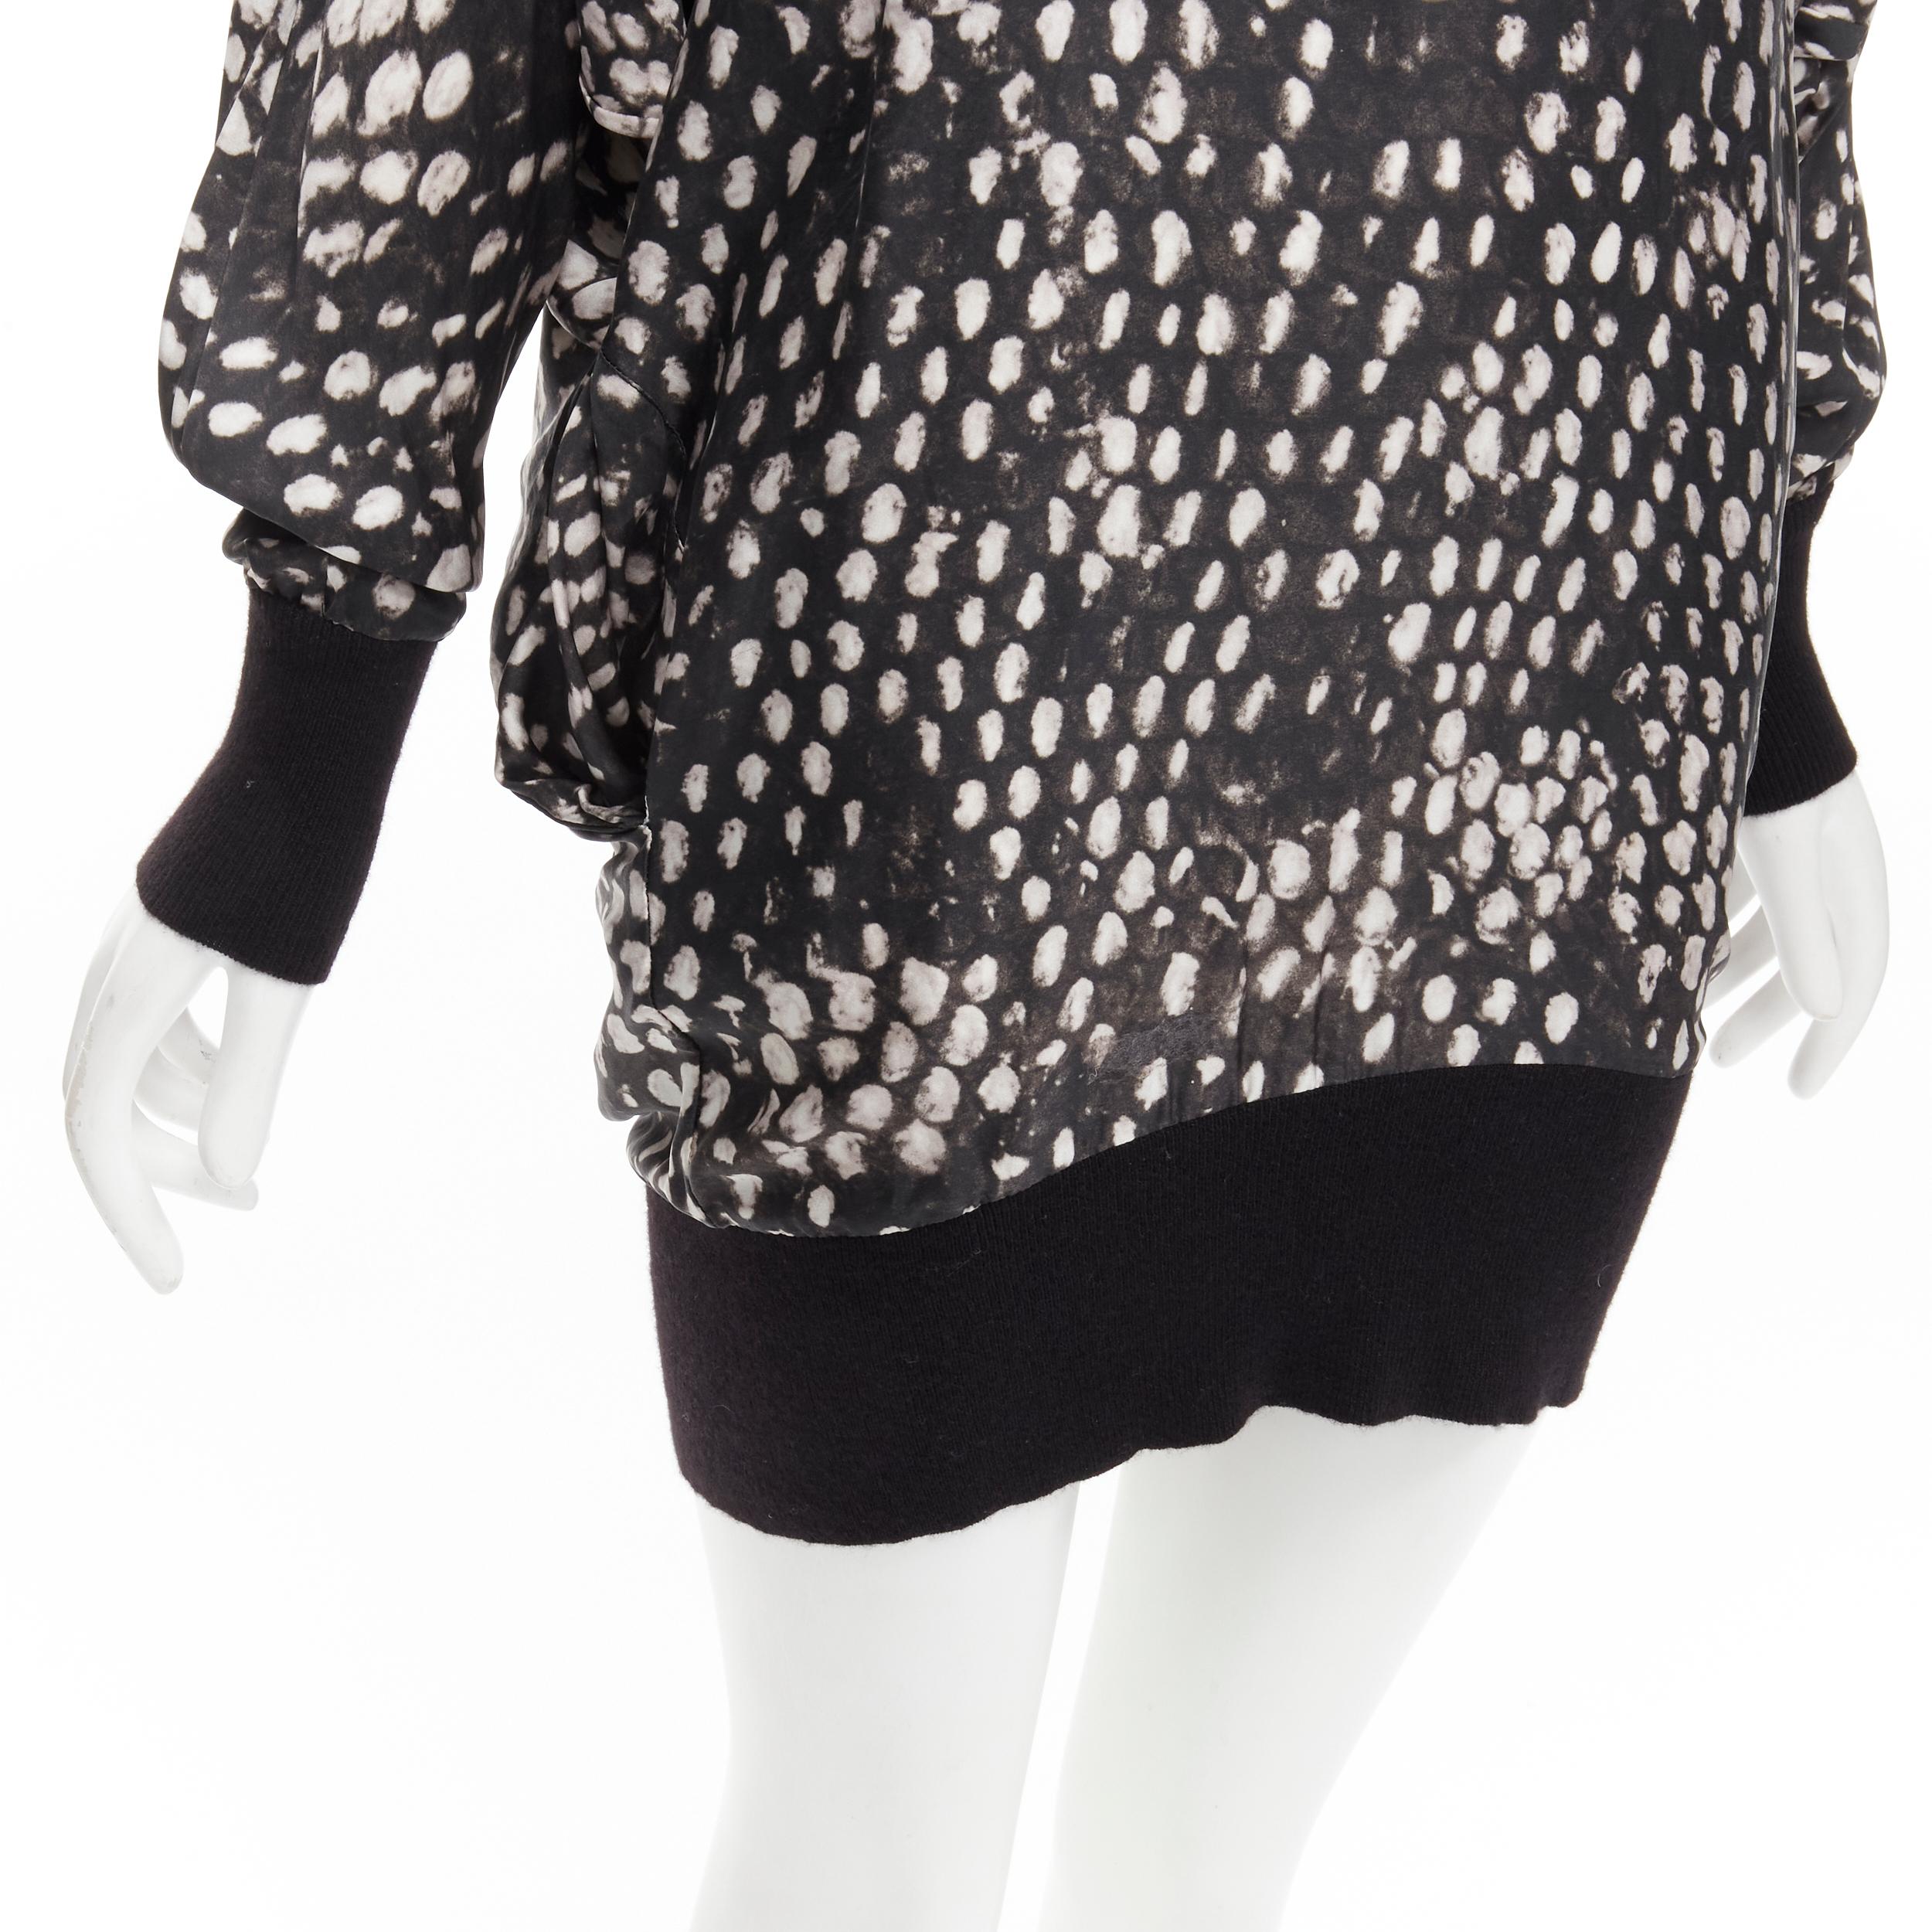 STELLA MCCARTNEY silky black white spot print dolman sleeves relaxed dress
Reference: YNWG/A00169
Brand: Stella McCartney
Designer: Stella McCartney
Material: Feels like silk
Color: Black, White
Pattern: Dotted
Closure: Keyhole Button
Extra Details: